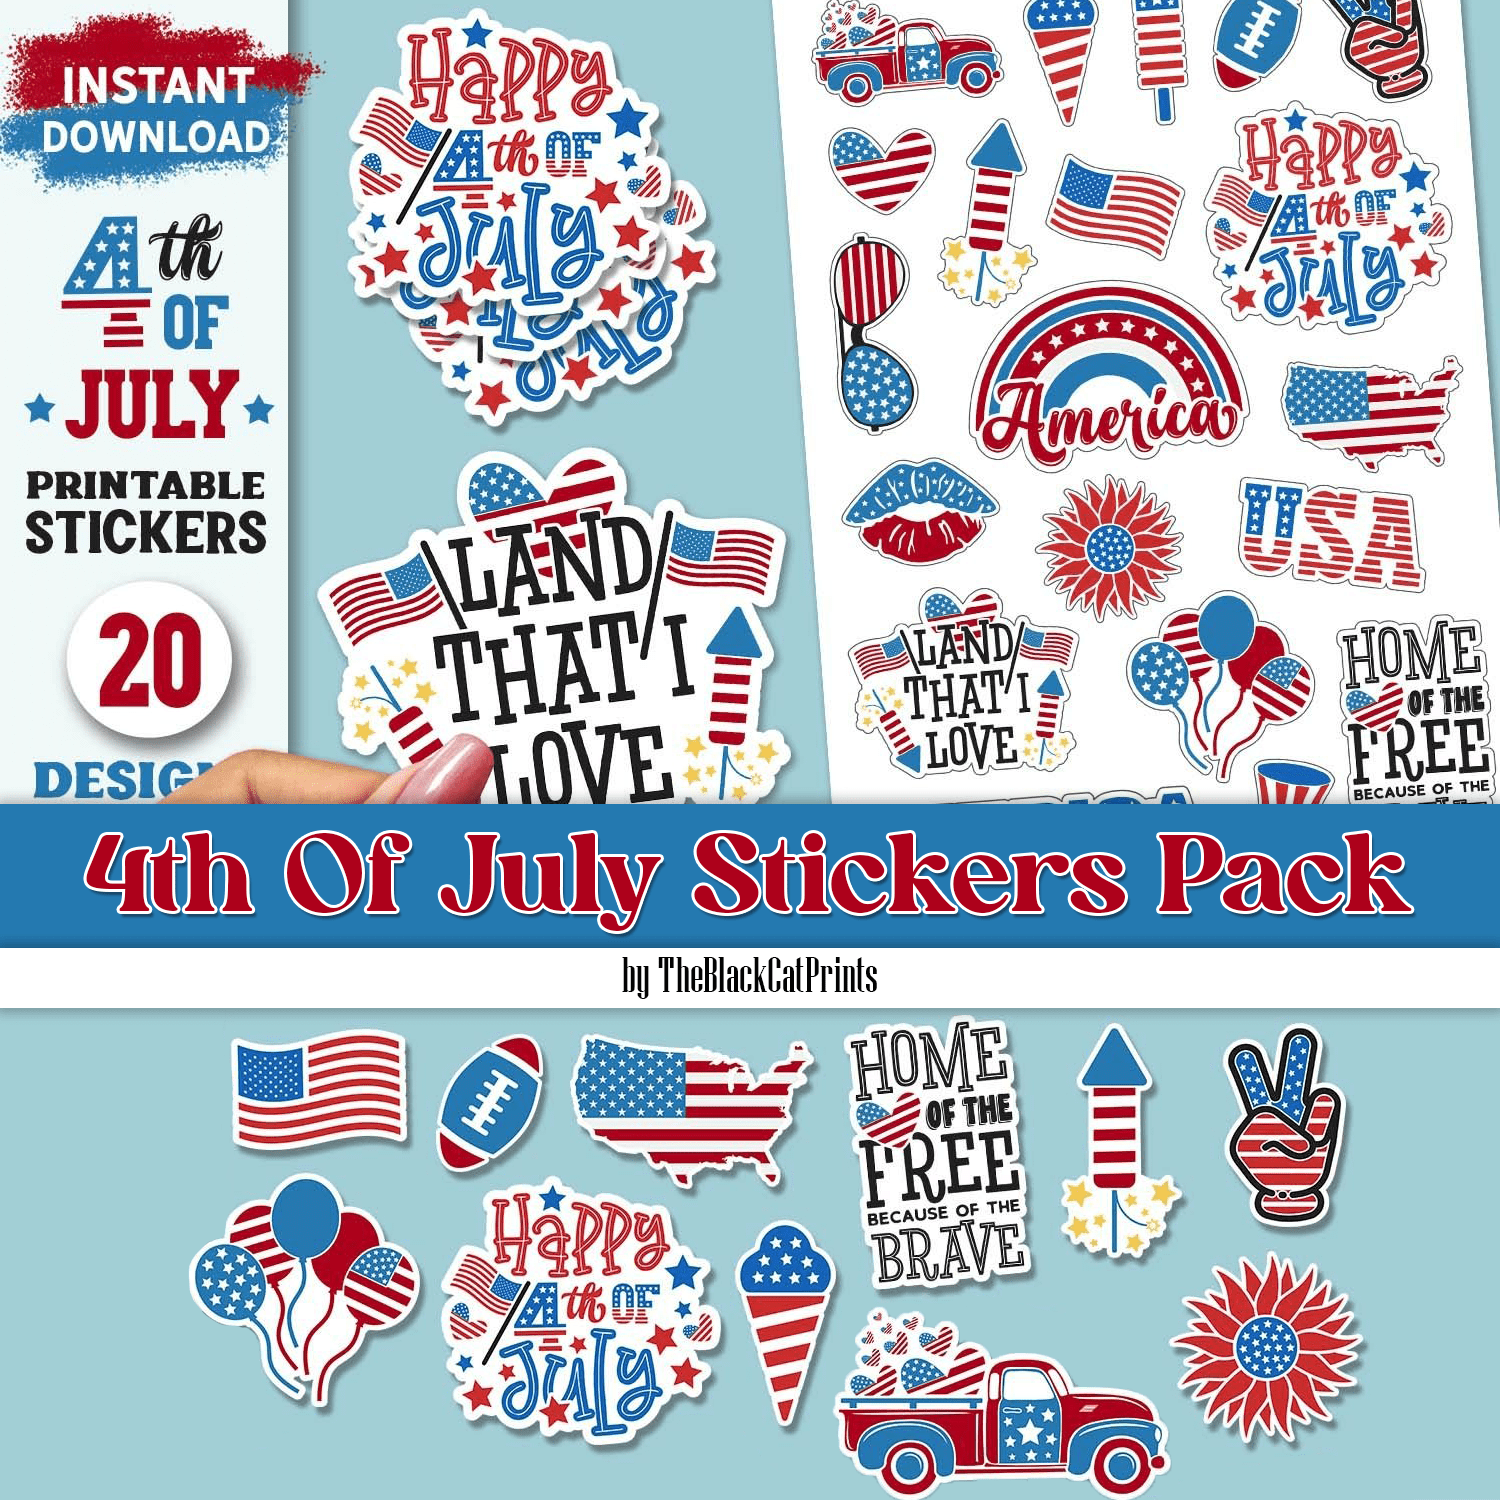 4th Of July Stickers Pack - main image preview.